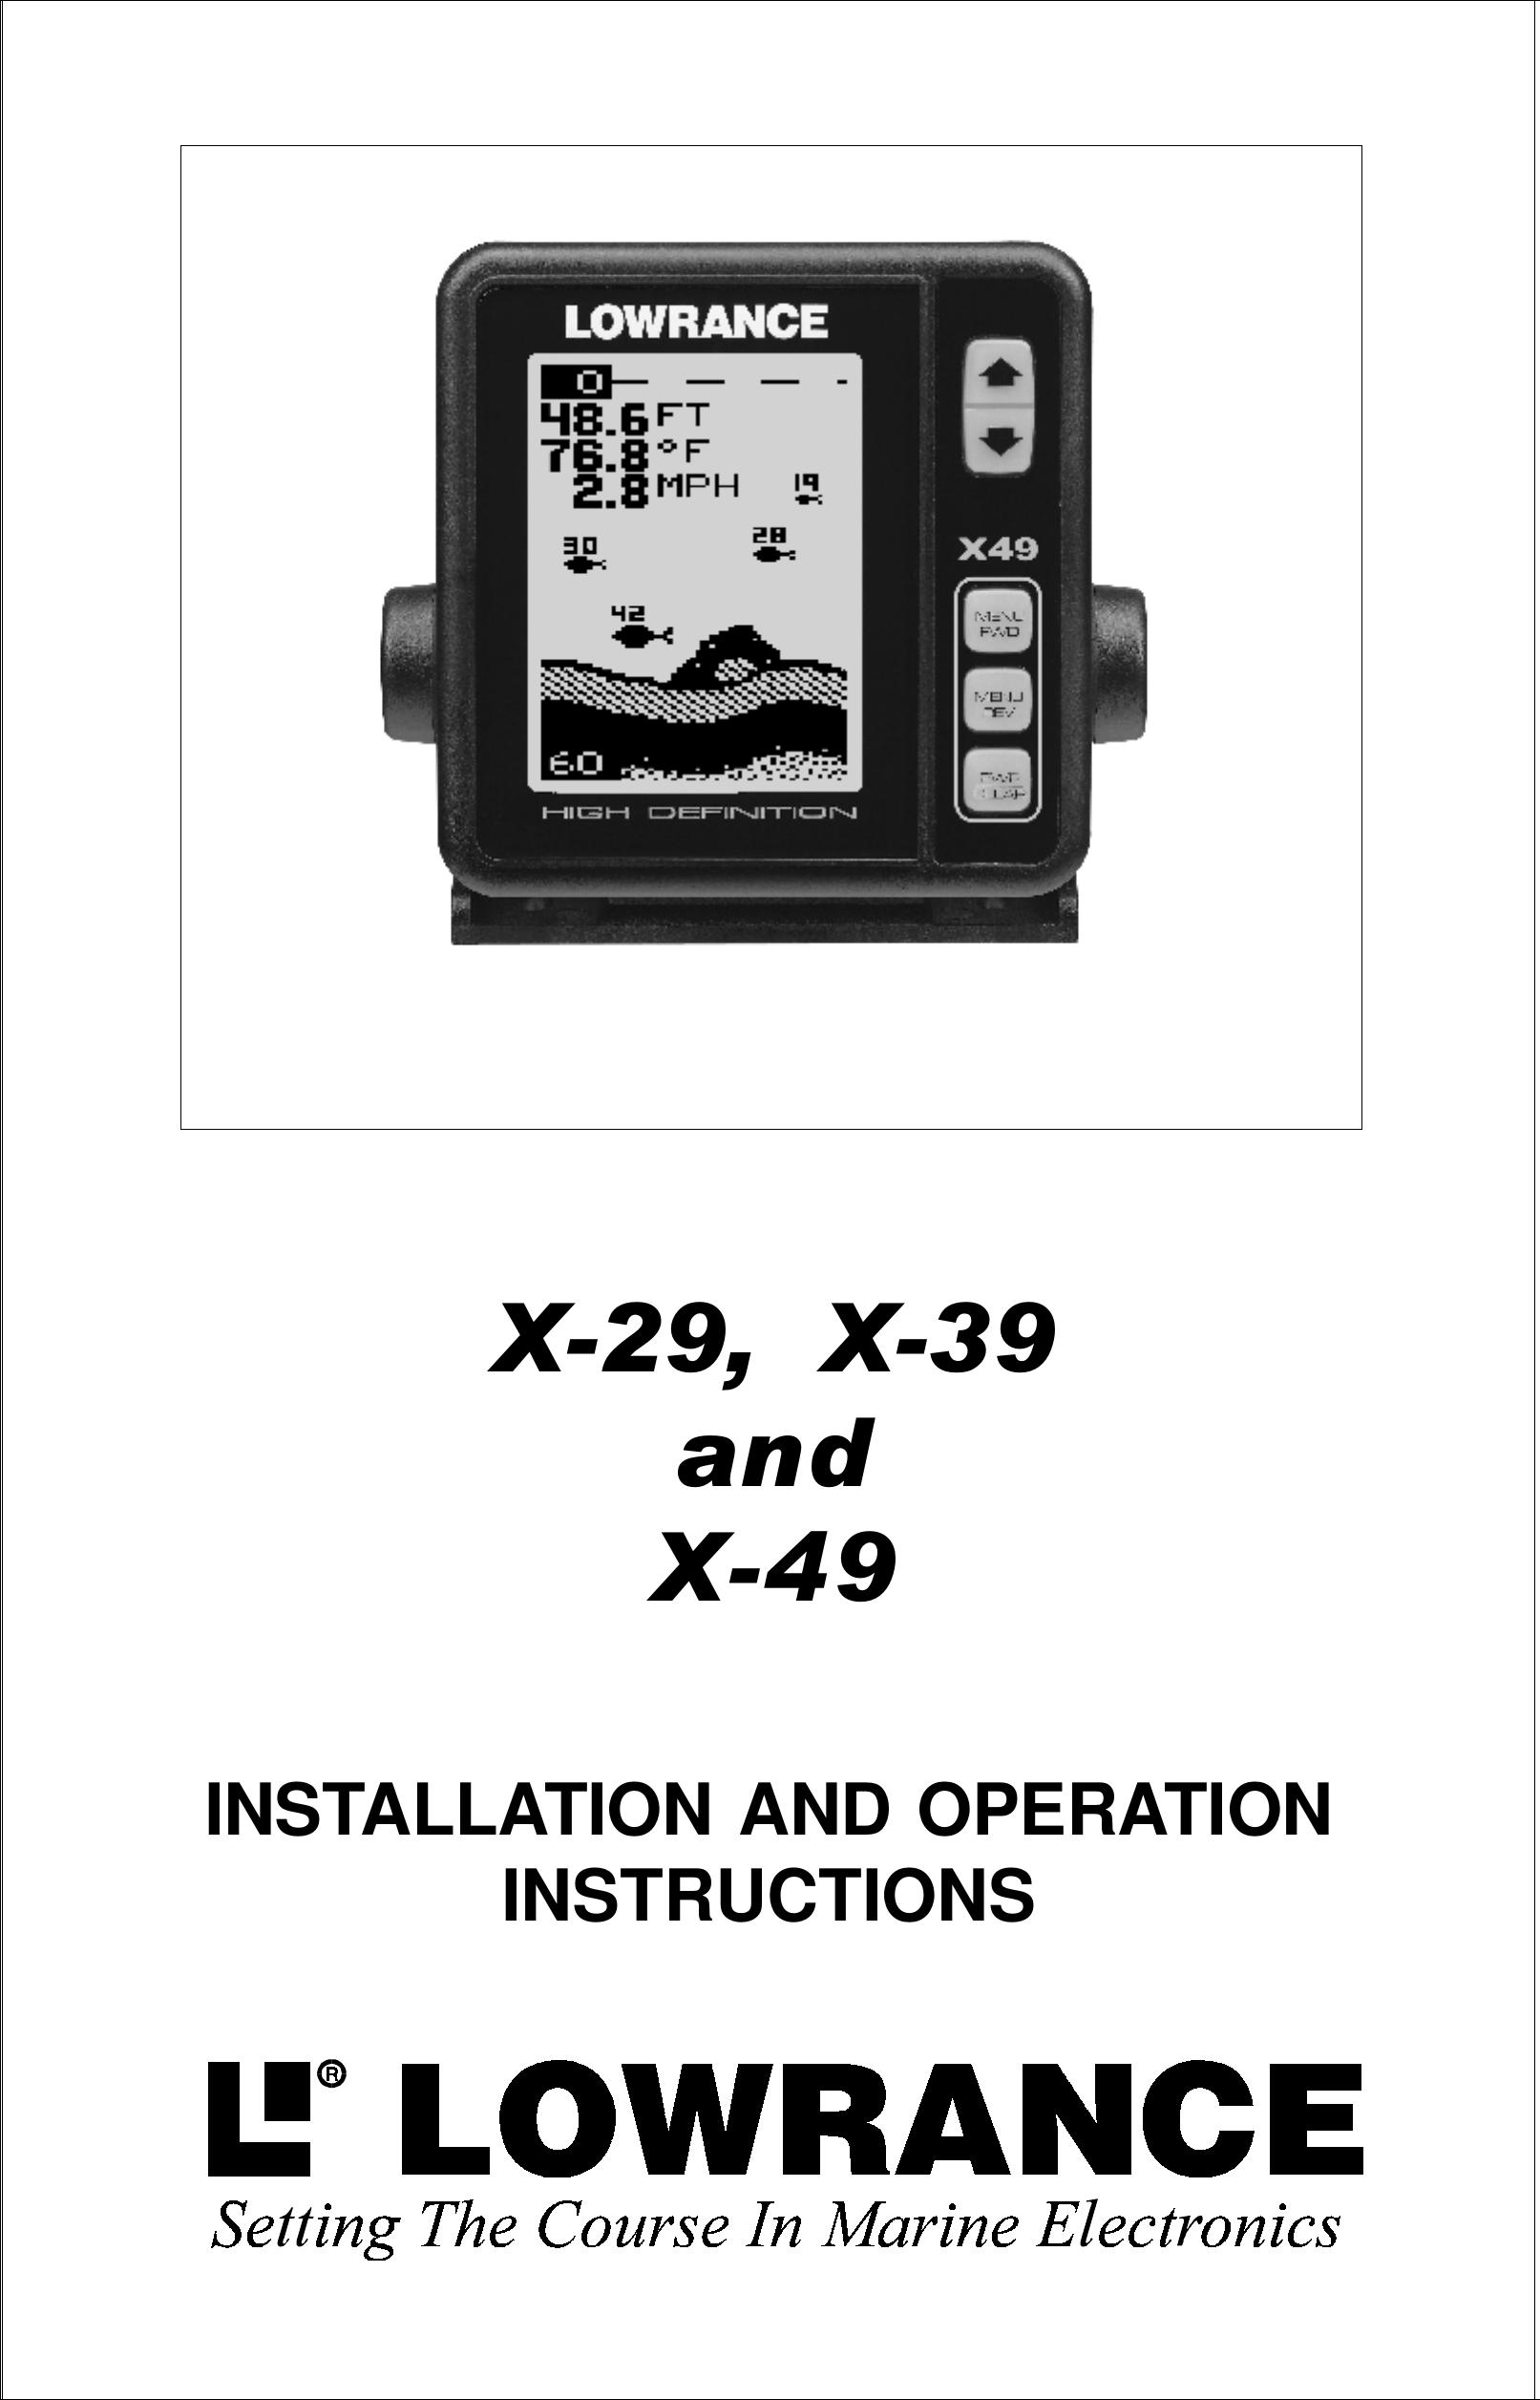 Lowrance electronic X-29 Fish Finder User Manual